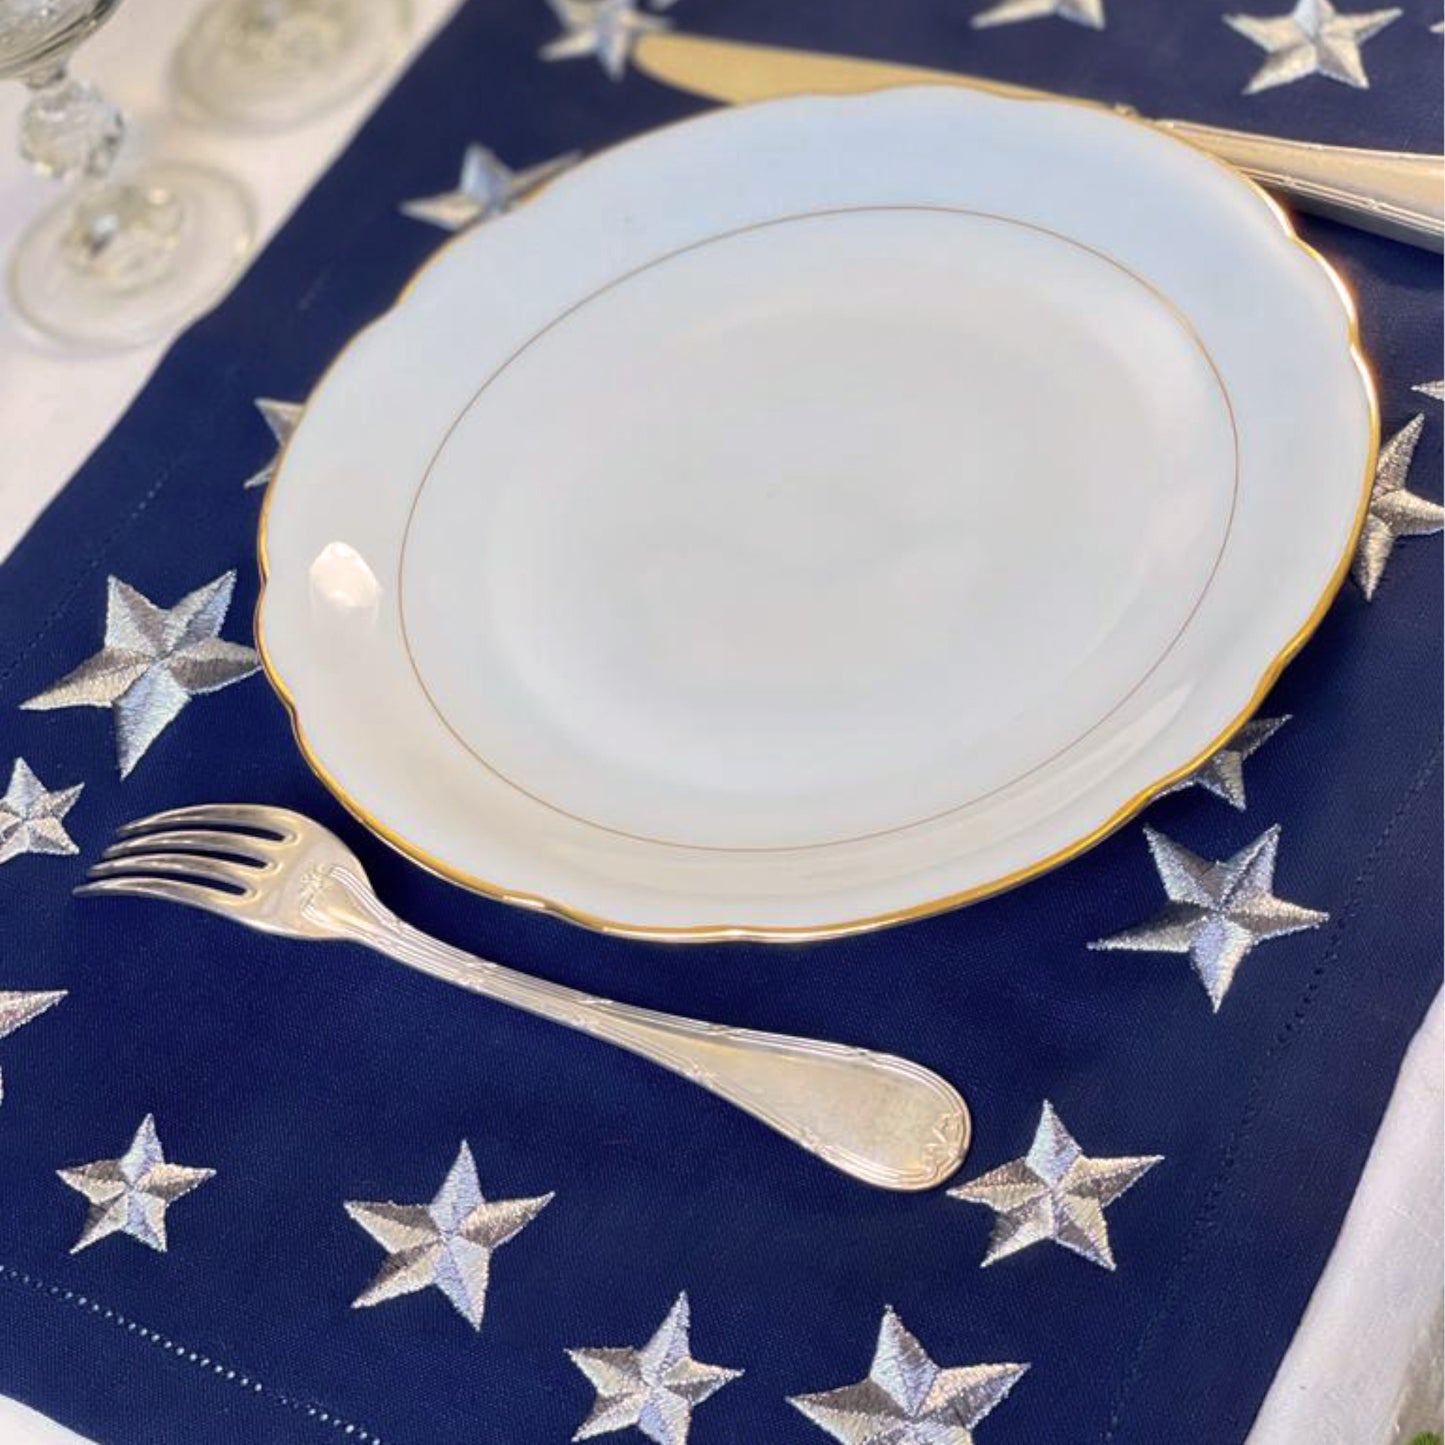 
                  
                    Silver Stars Placemat - Navy
                  
                